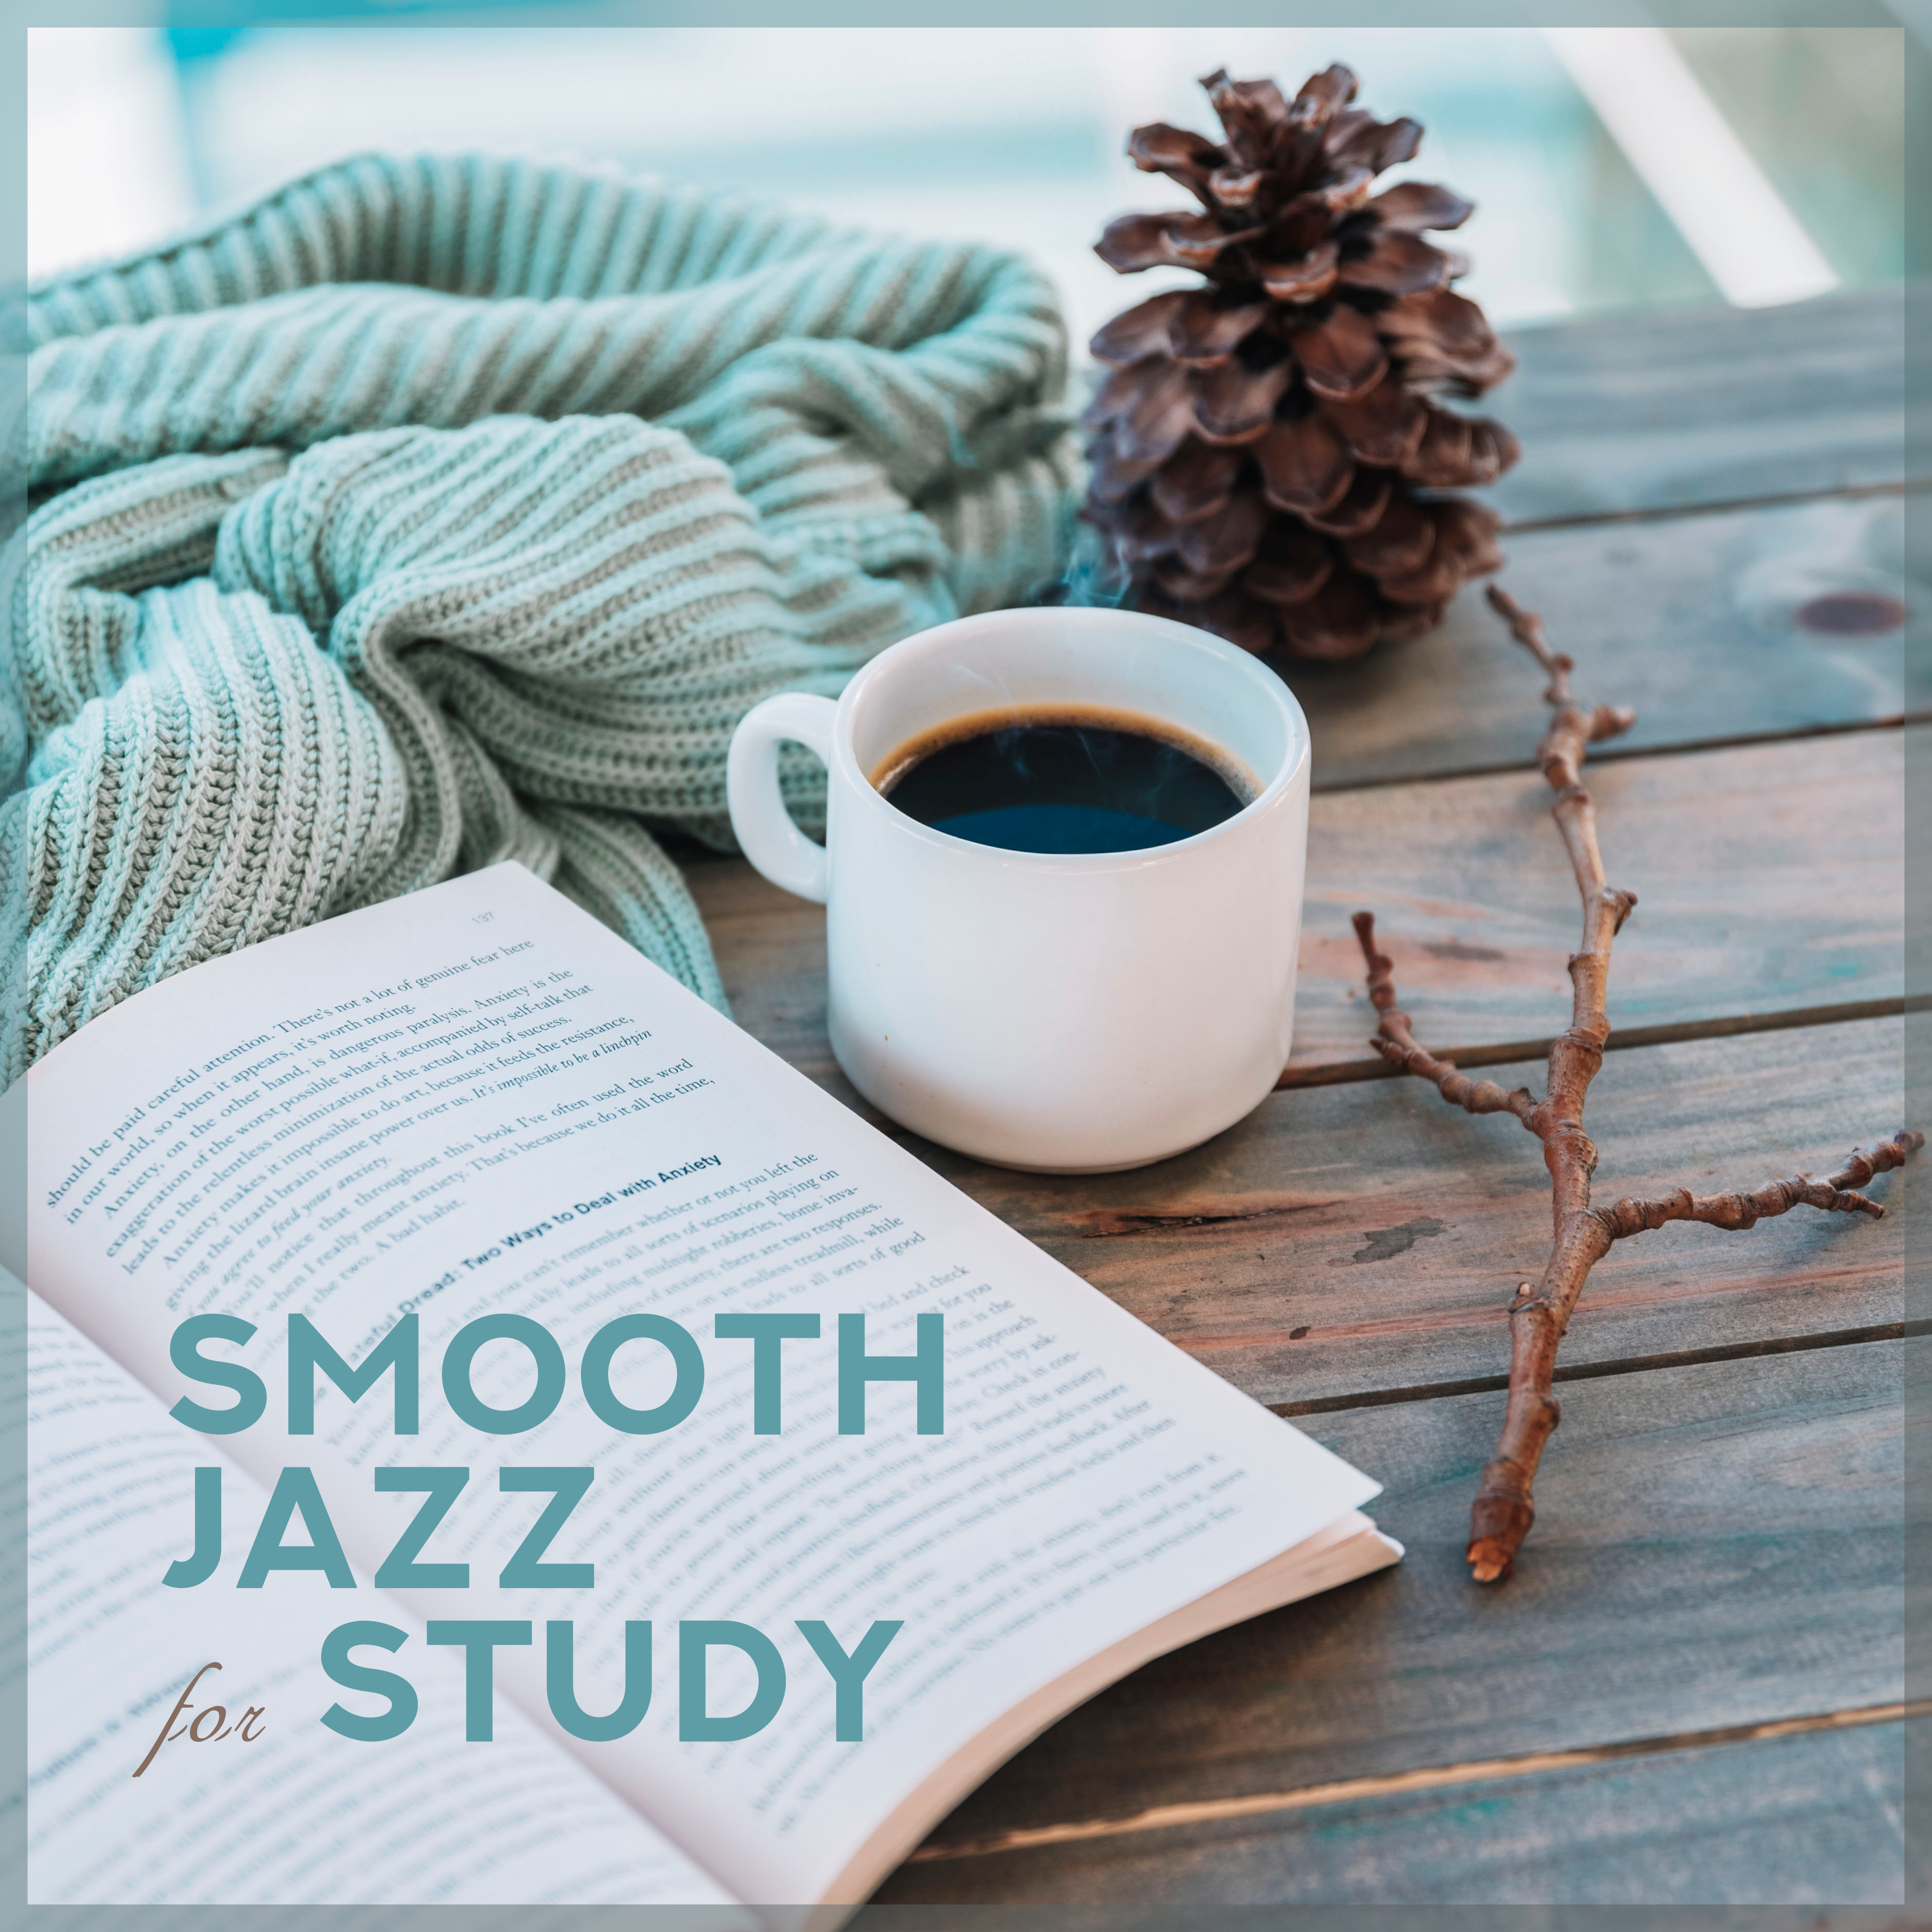 Smooth Jazz for Study – Instrumental Music for Work, Relaxation, Best Classical Jazz, Full Concentration, Antistress Music, Jazz Lounge